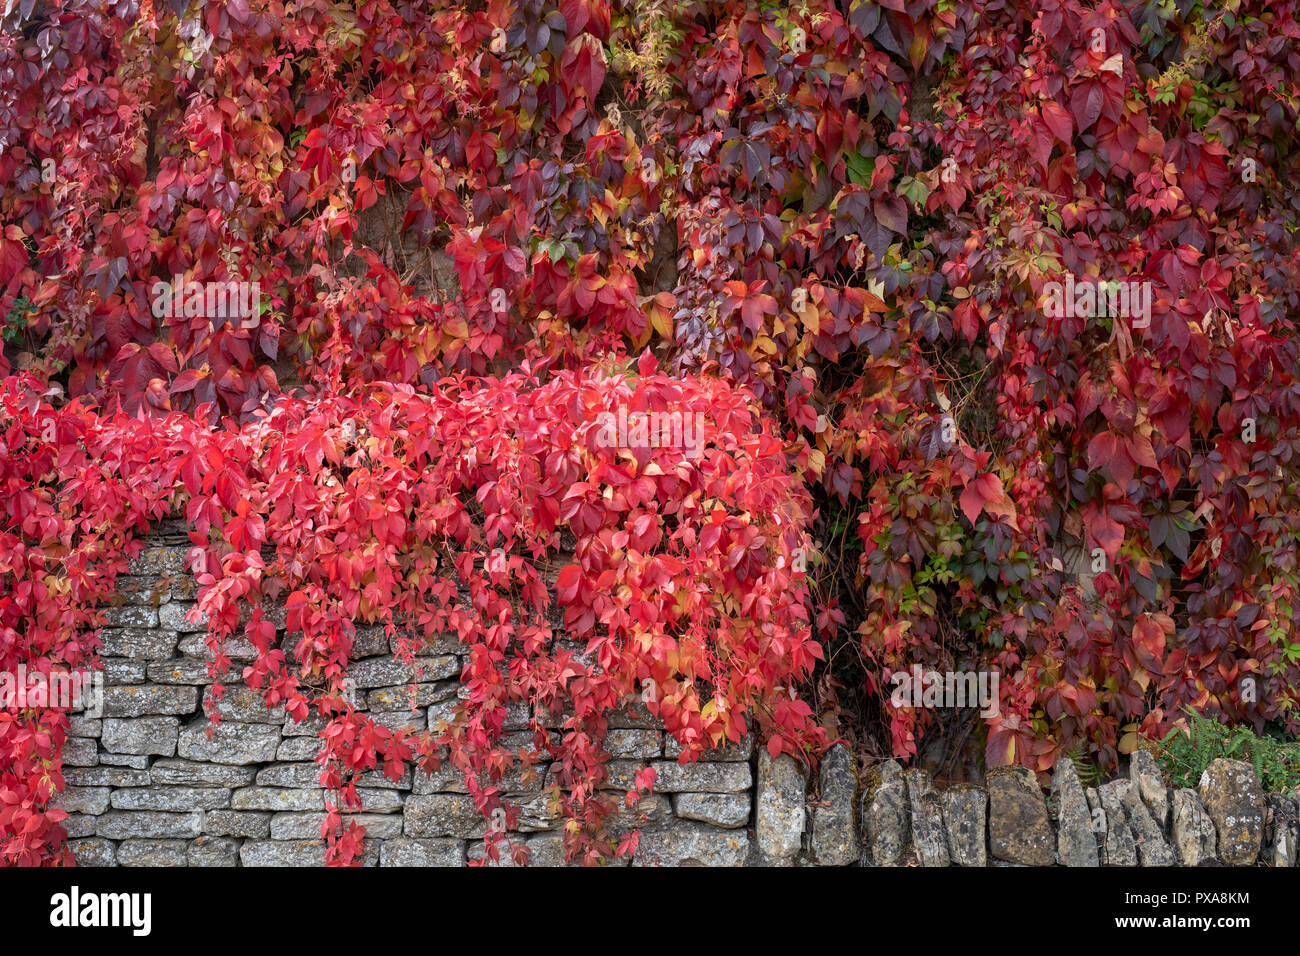 Parthenocissus quinquefolia.Virginia creeper / American ivy covering the walls of a cottage. Kingham, Cotswolds, Oxfordshire, England Stock Photo